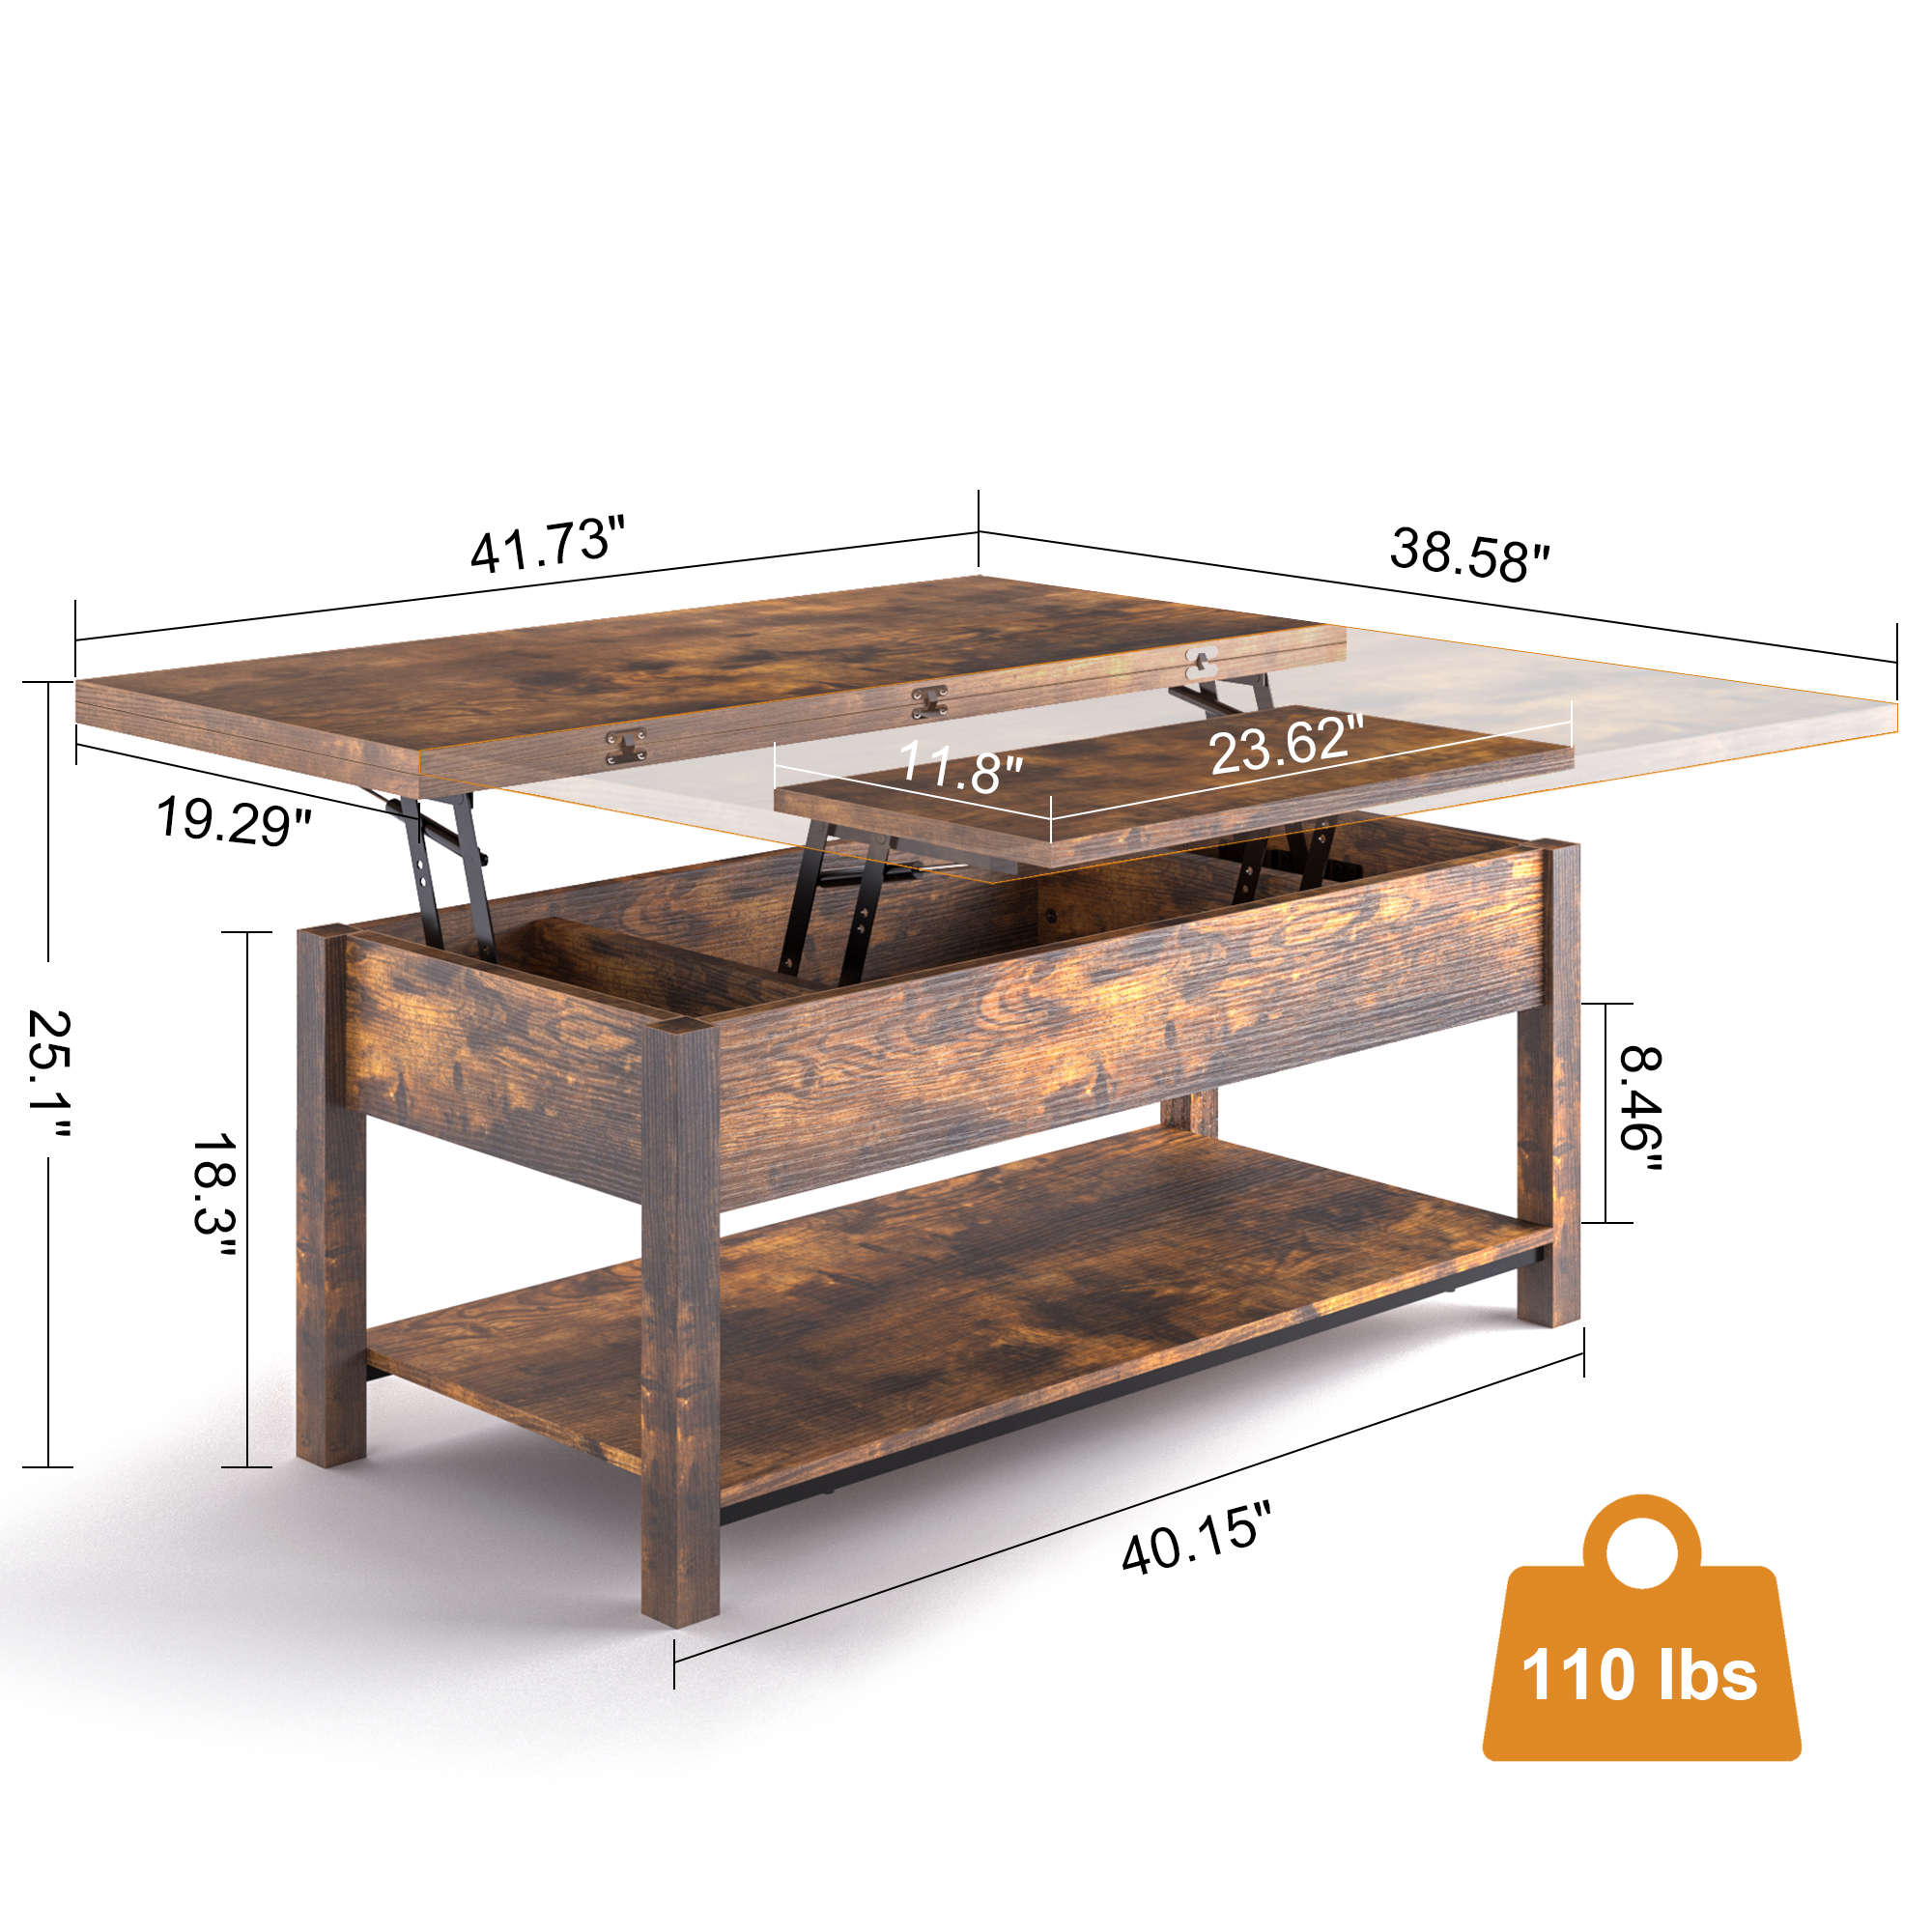 GUNAITO 41.73"Lift Top Coffee Table 4 in 1 Multi-Function Convertible Coffee Table with Hidden Storage Framhouse Coffee Table for Living Room Rustic Brown - image 5 of 8